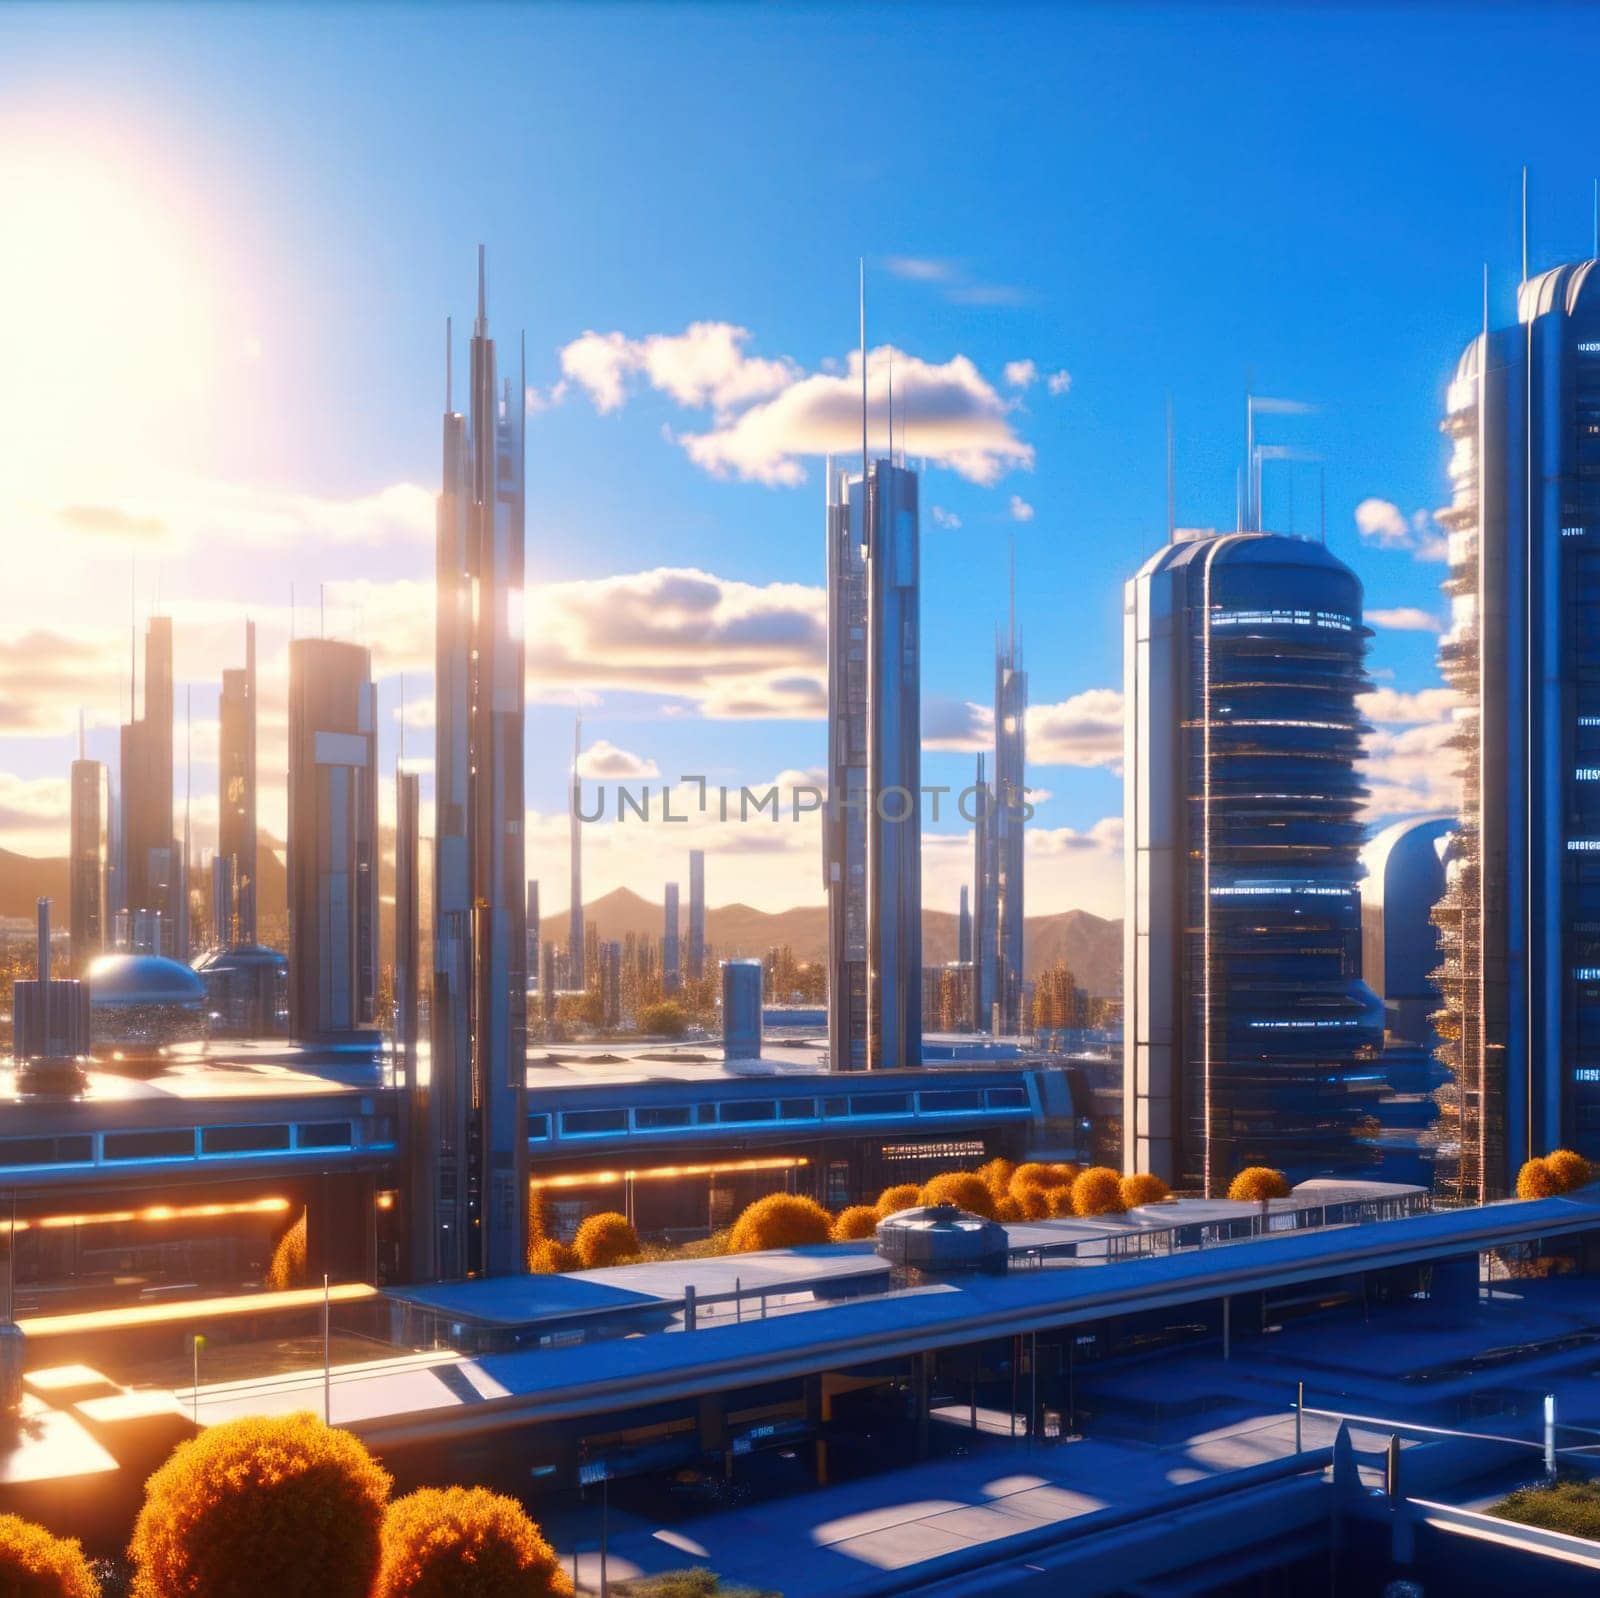 The city of the future. Image created by AI